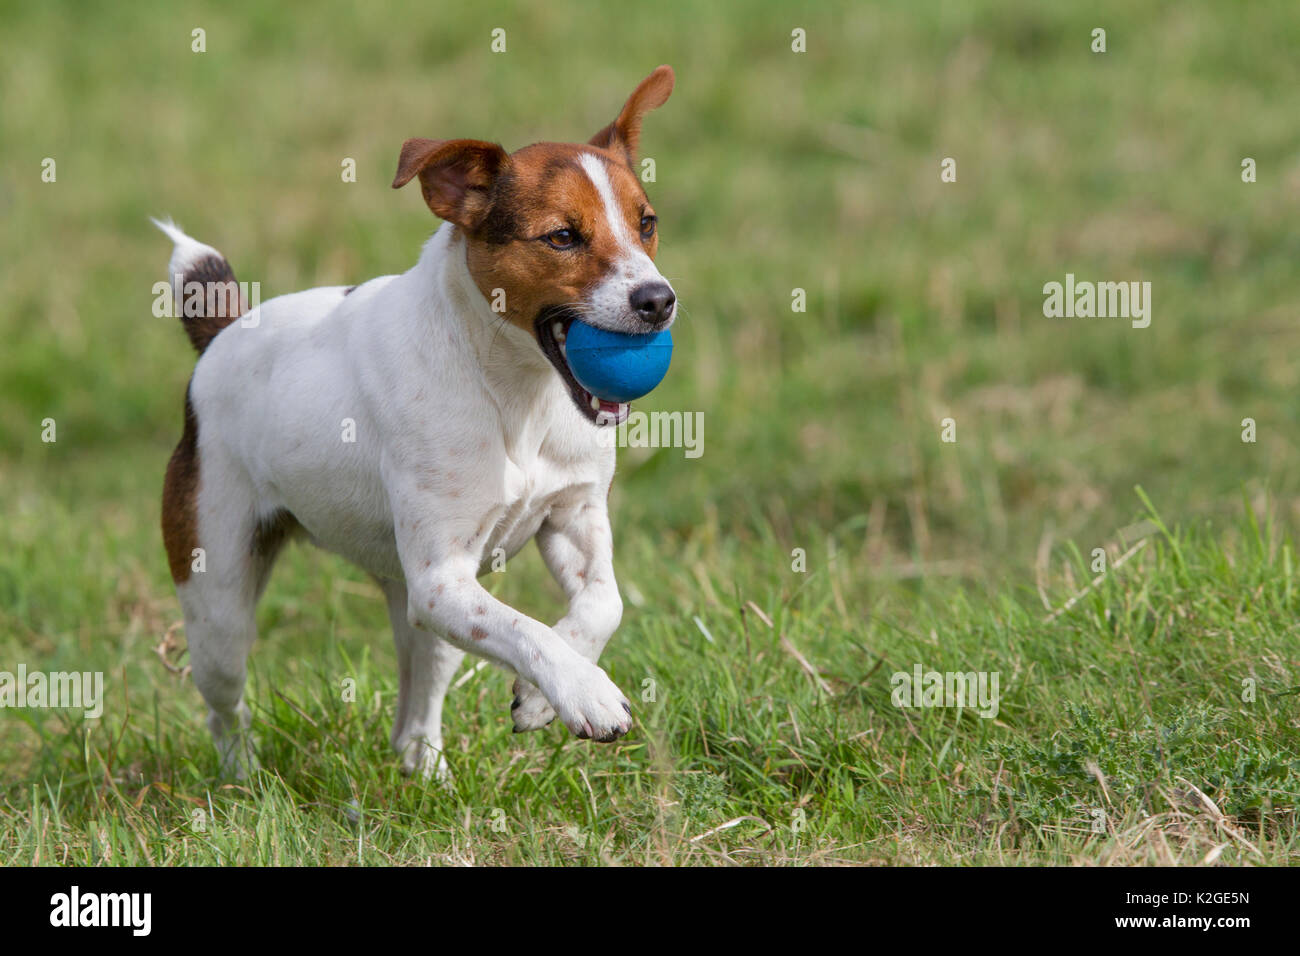 Young Jack Russell terrier running across a field carrying a blue ball in his mouth, Redbrook, Monmouthshire, Wales, UK, August. Stock Photo